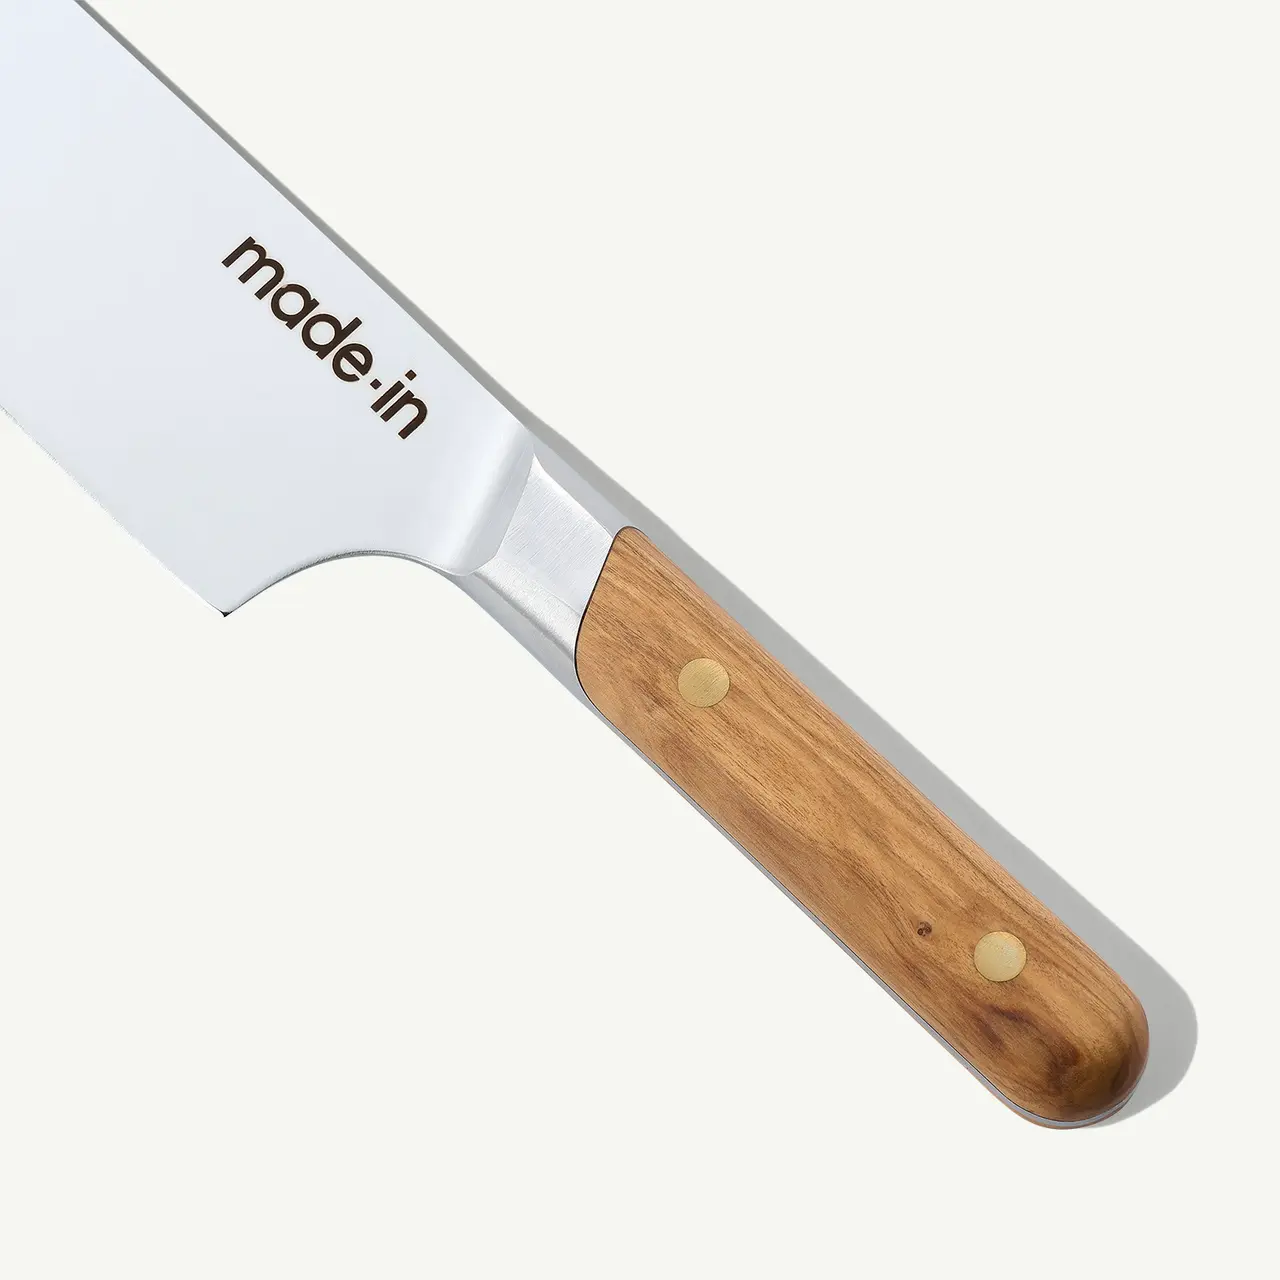 A close-up of a kitchen knife with a wooden handle and the words "made in" on the blade against a white background.